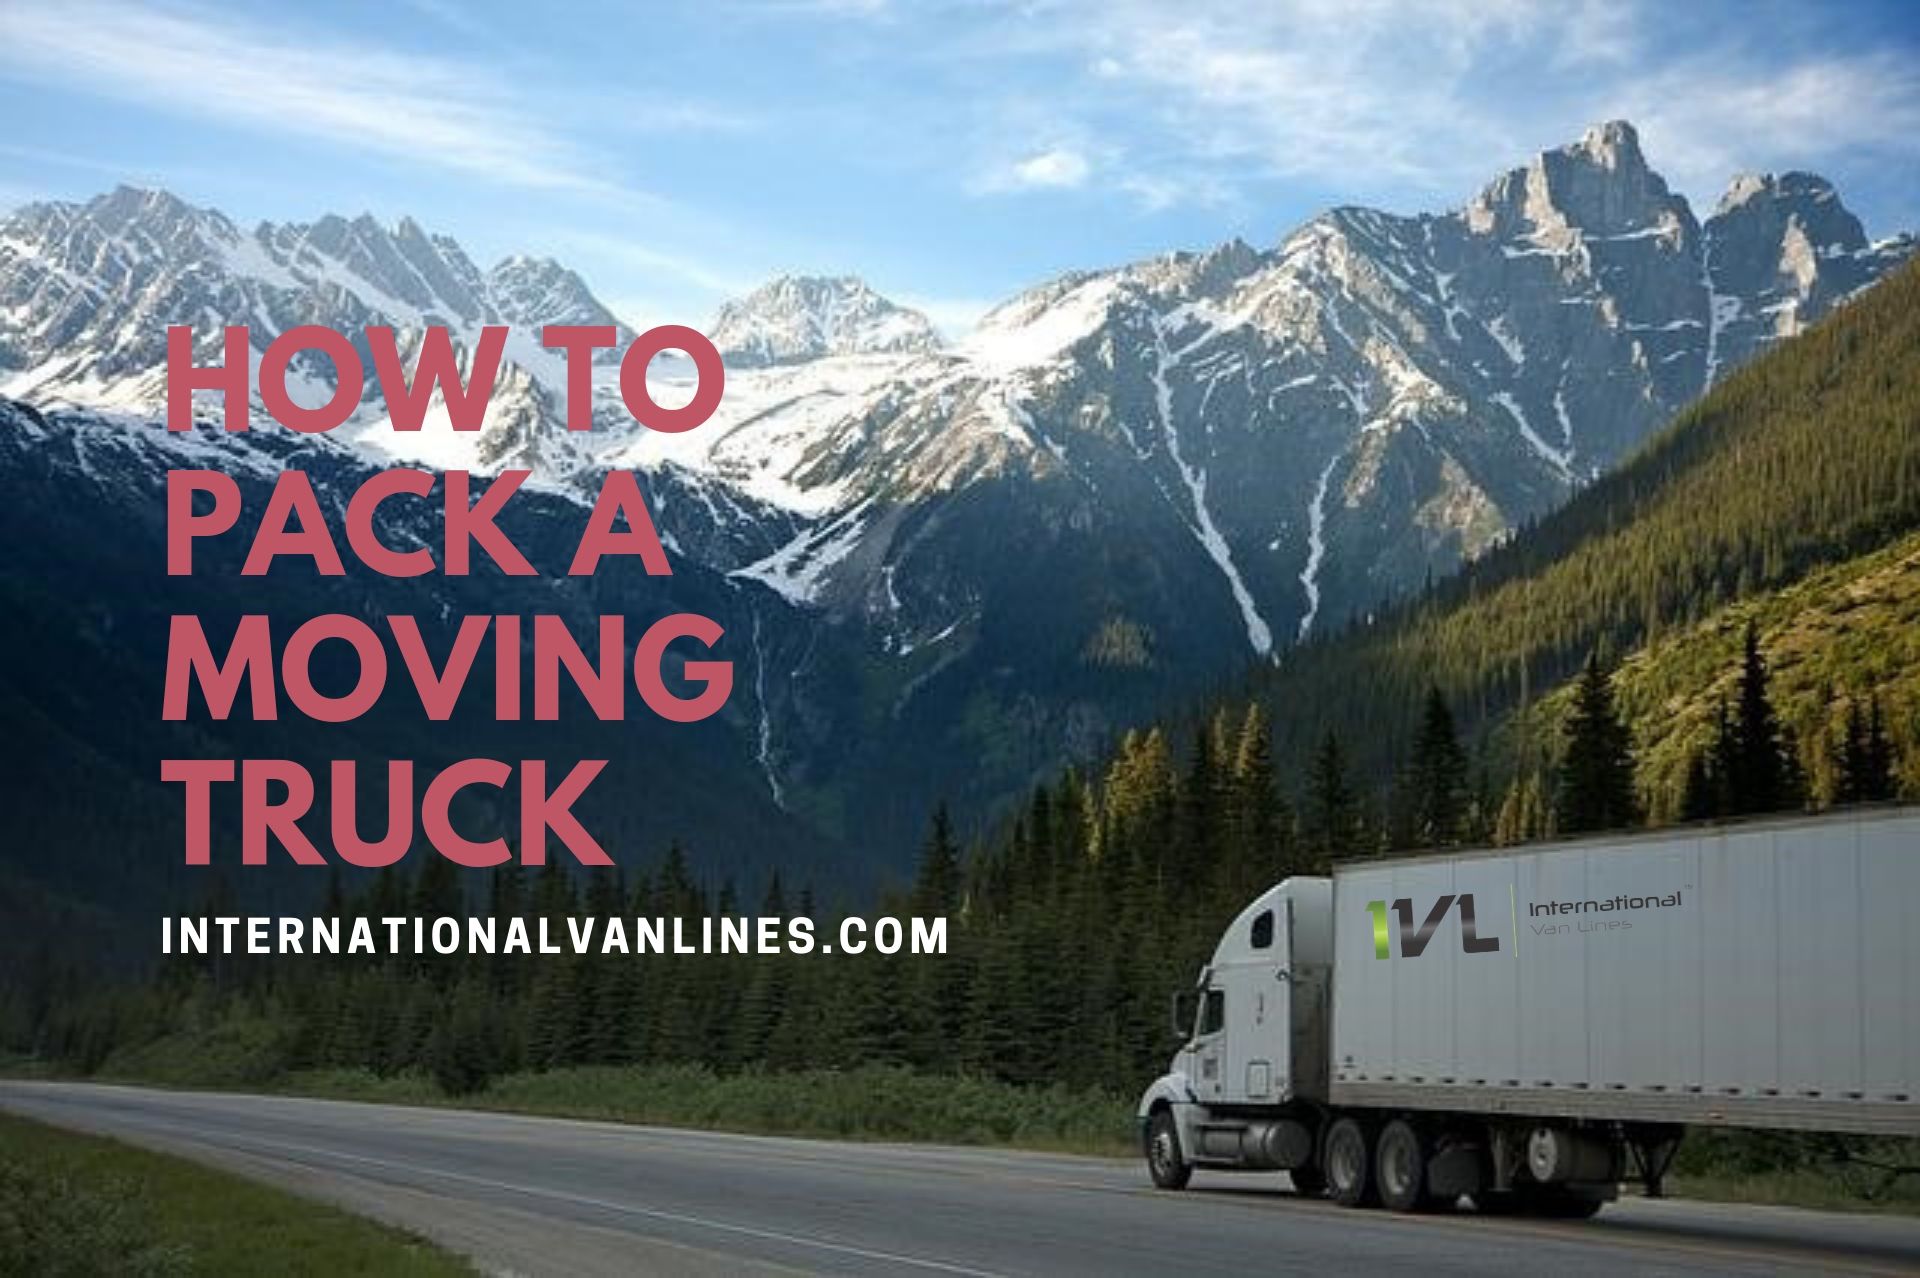 A moving truck going down a road towards mountains, representing how to pack a moving truck